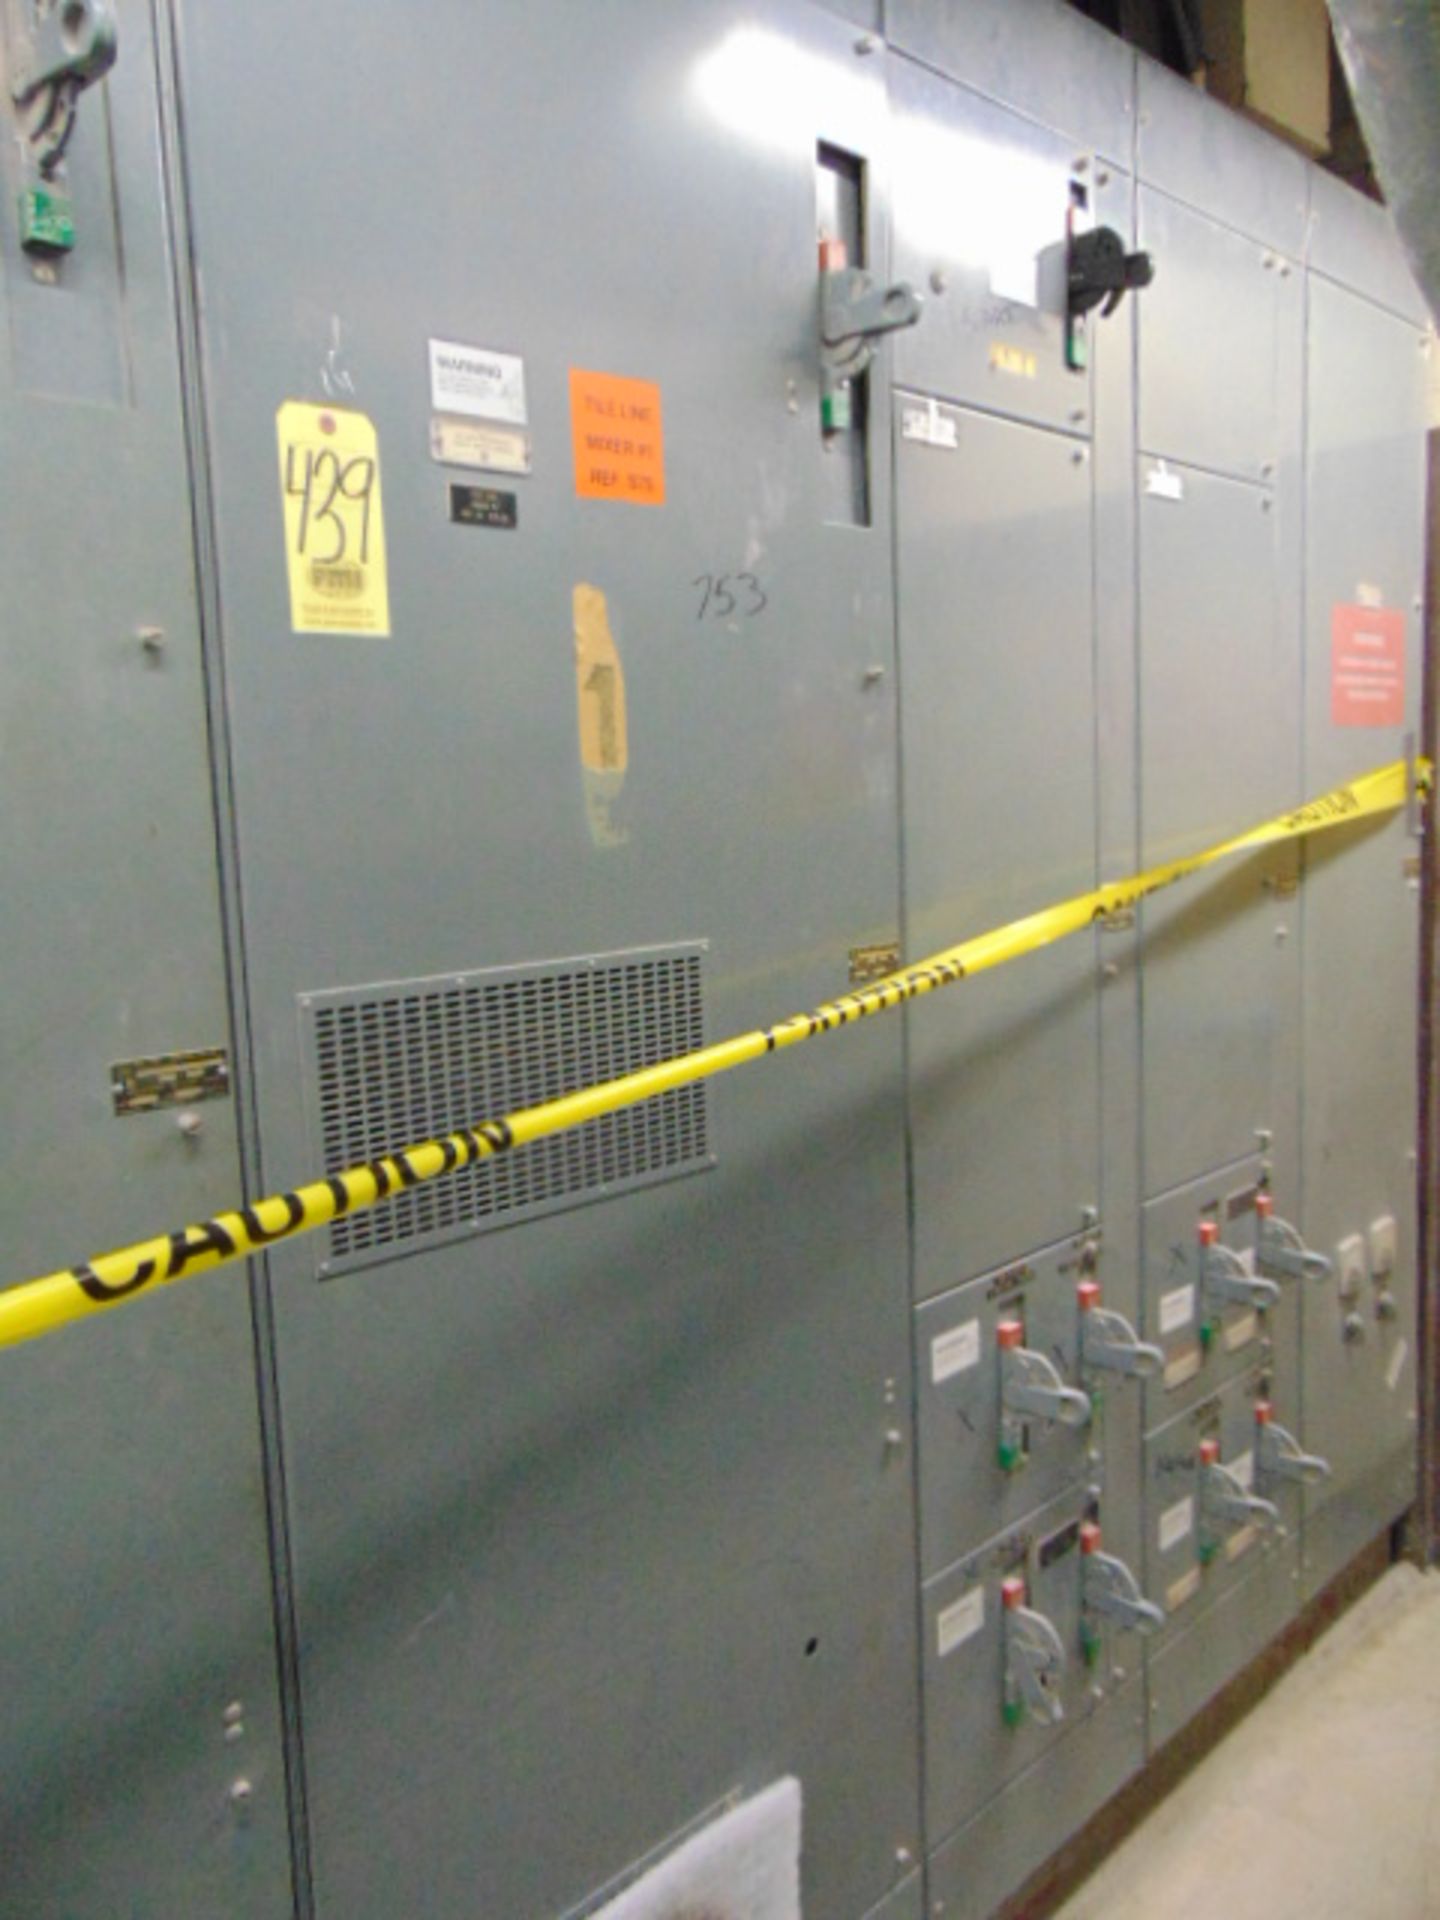 AC VARIABLE FREQUENCY DRIVE, ALLEN BRADLEY POWERFLEX MDL. 753 (located on 2nd floor) (Note: has been